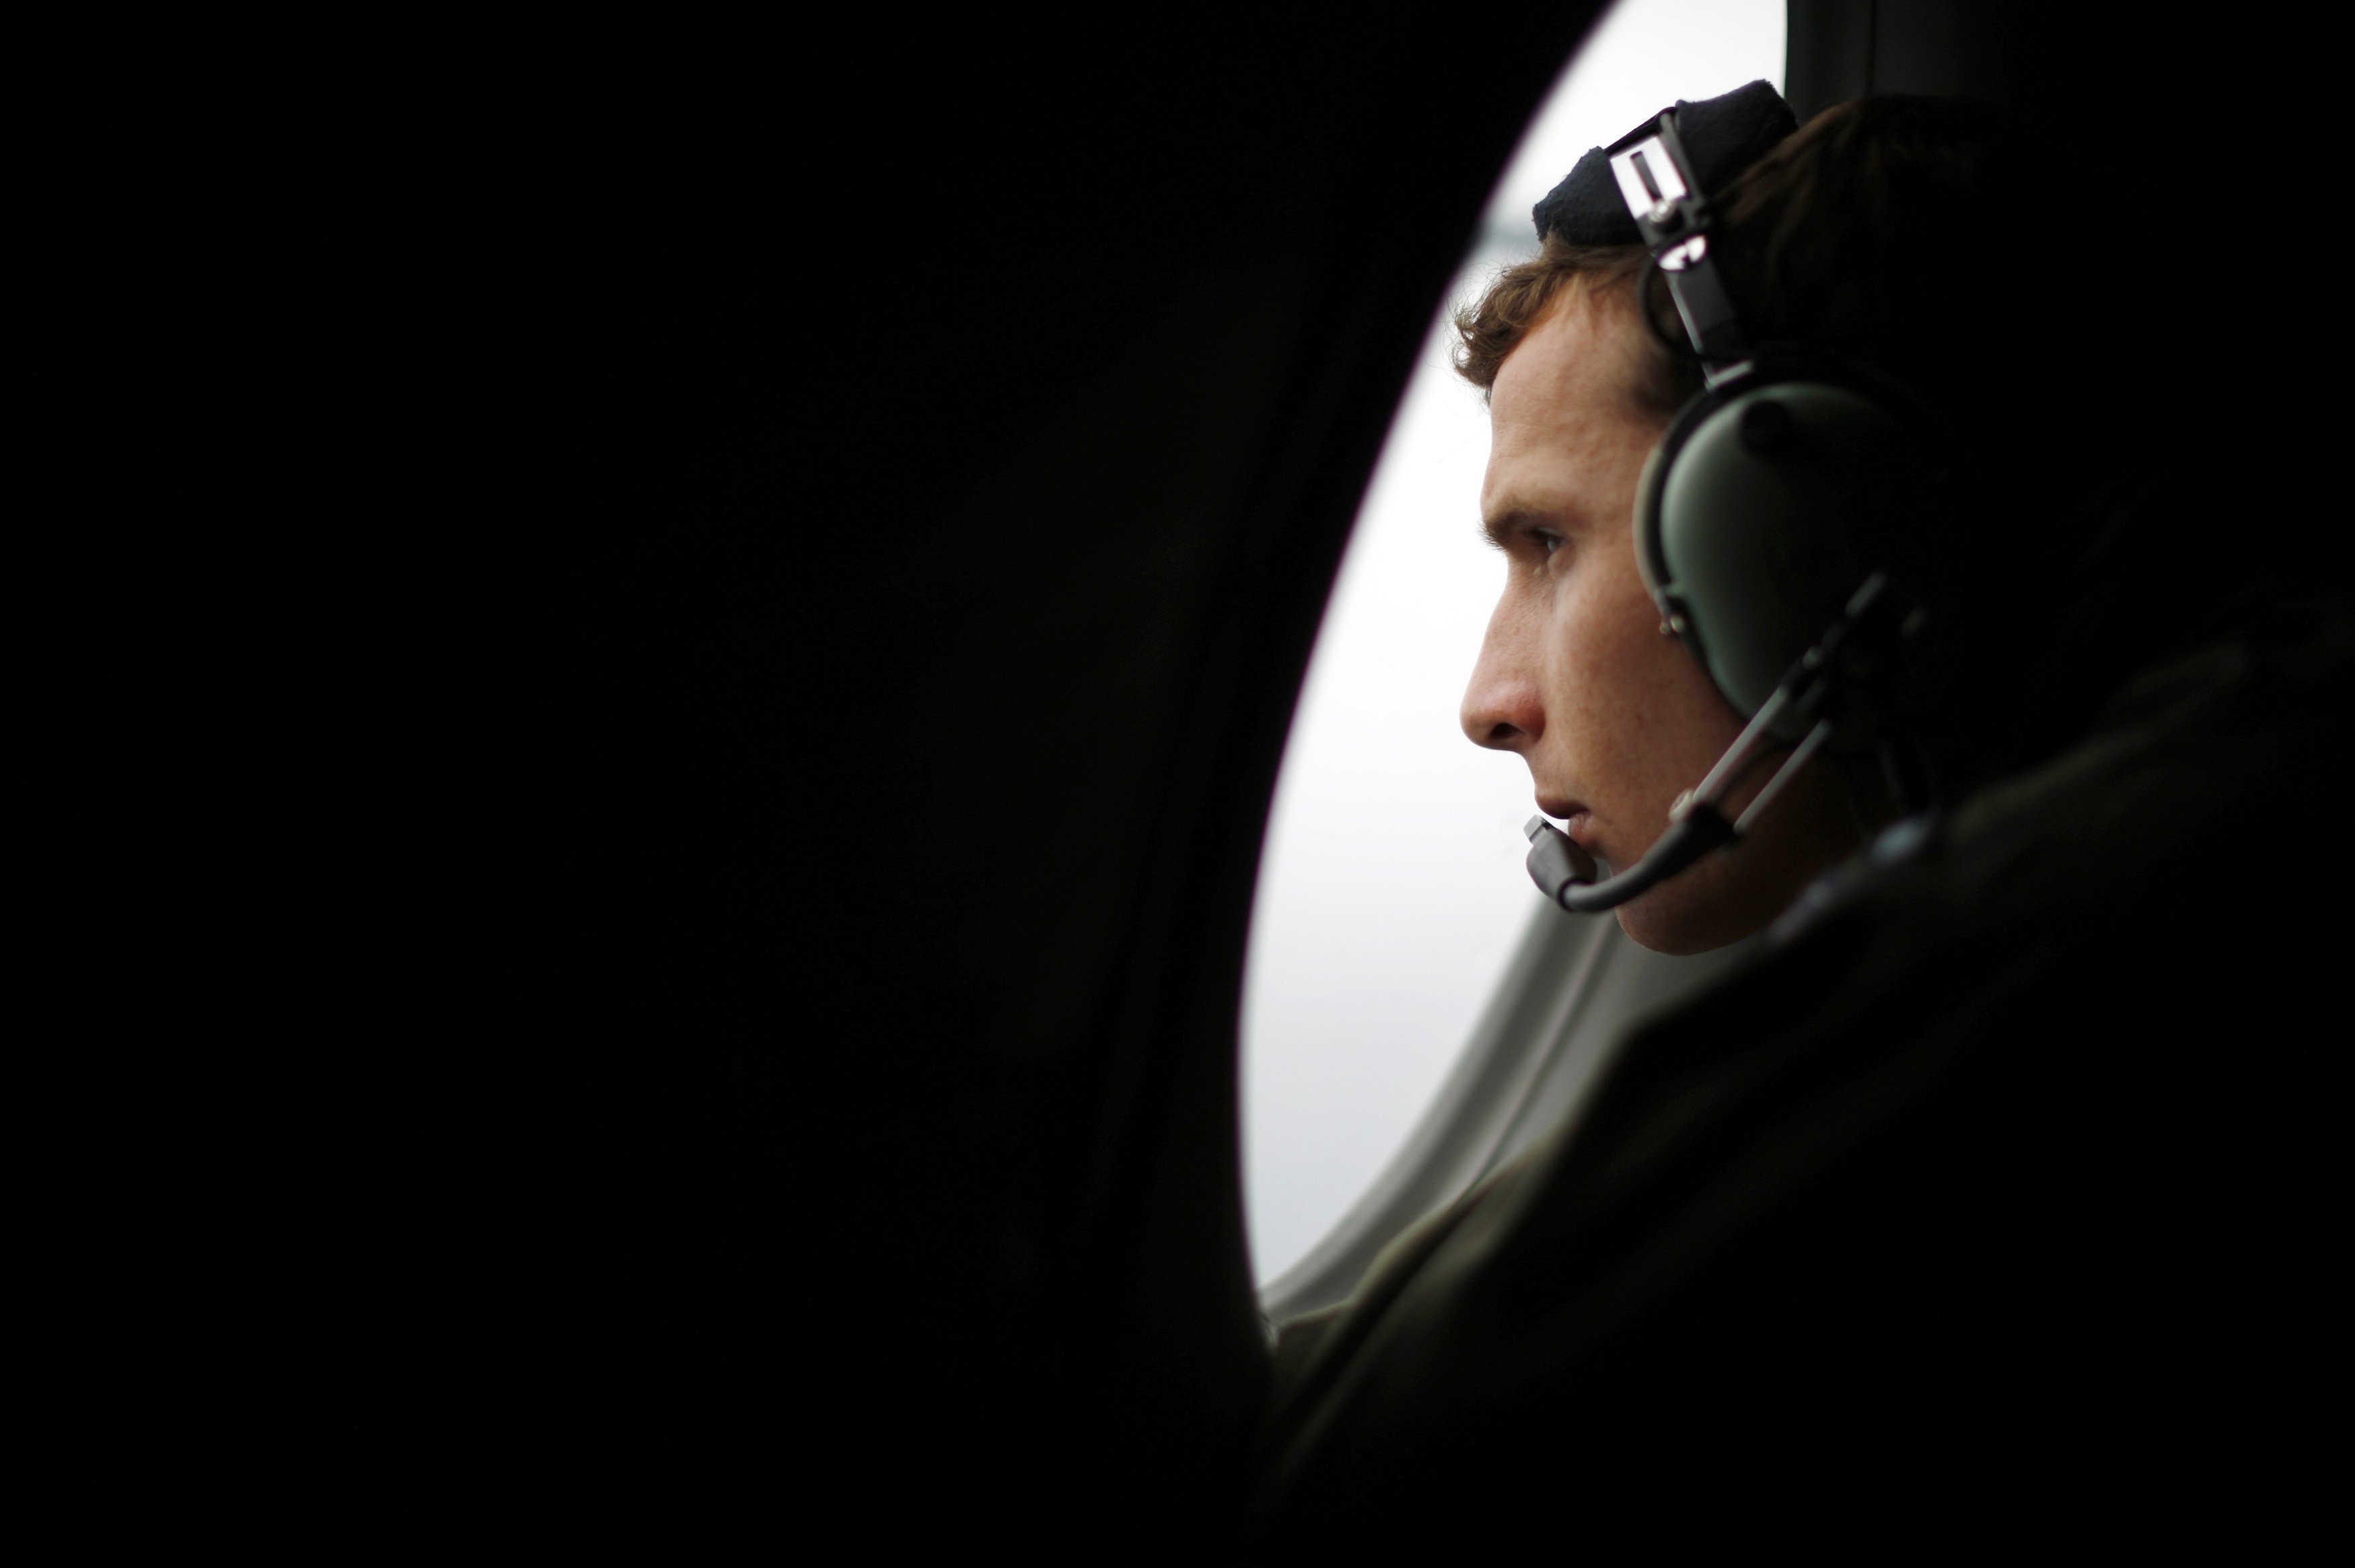 A crew member aboard a Royal New Zealand Air Force P-3K2 Orion aircraft searches for missing Malaysian Airlines flight MH370 over the southern Indian Ocean